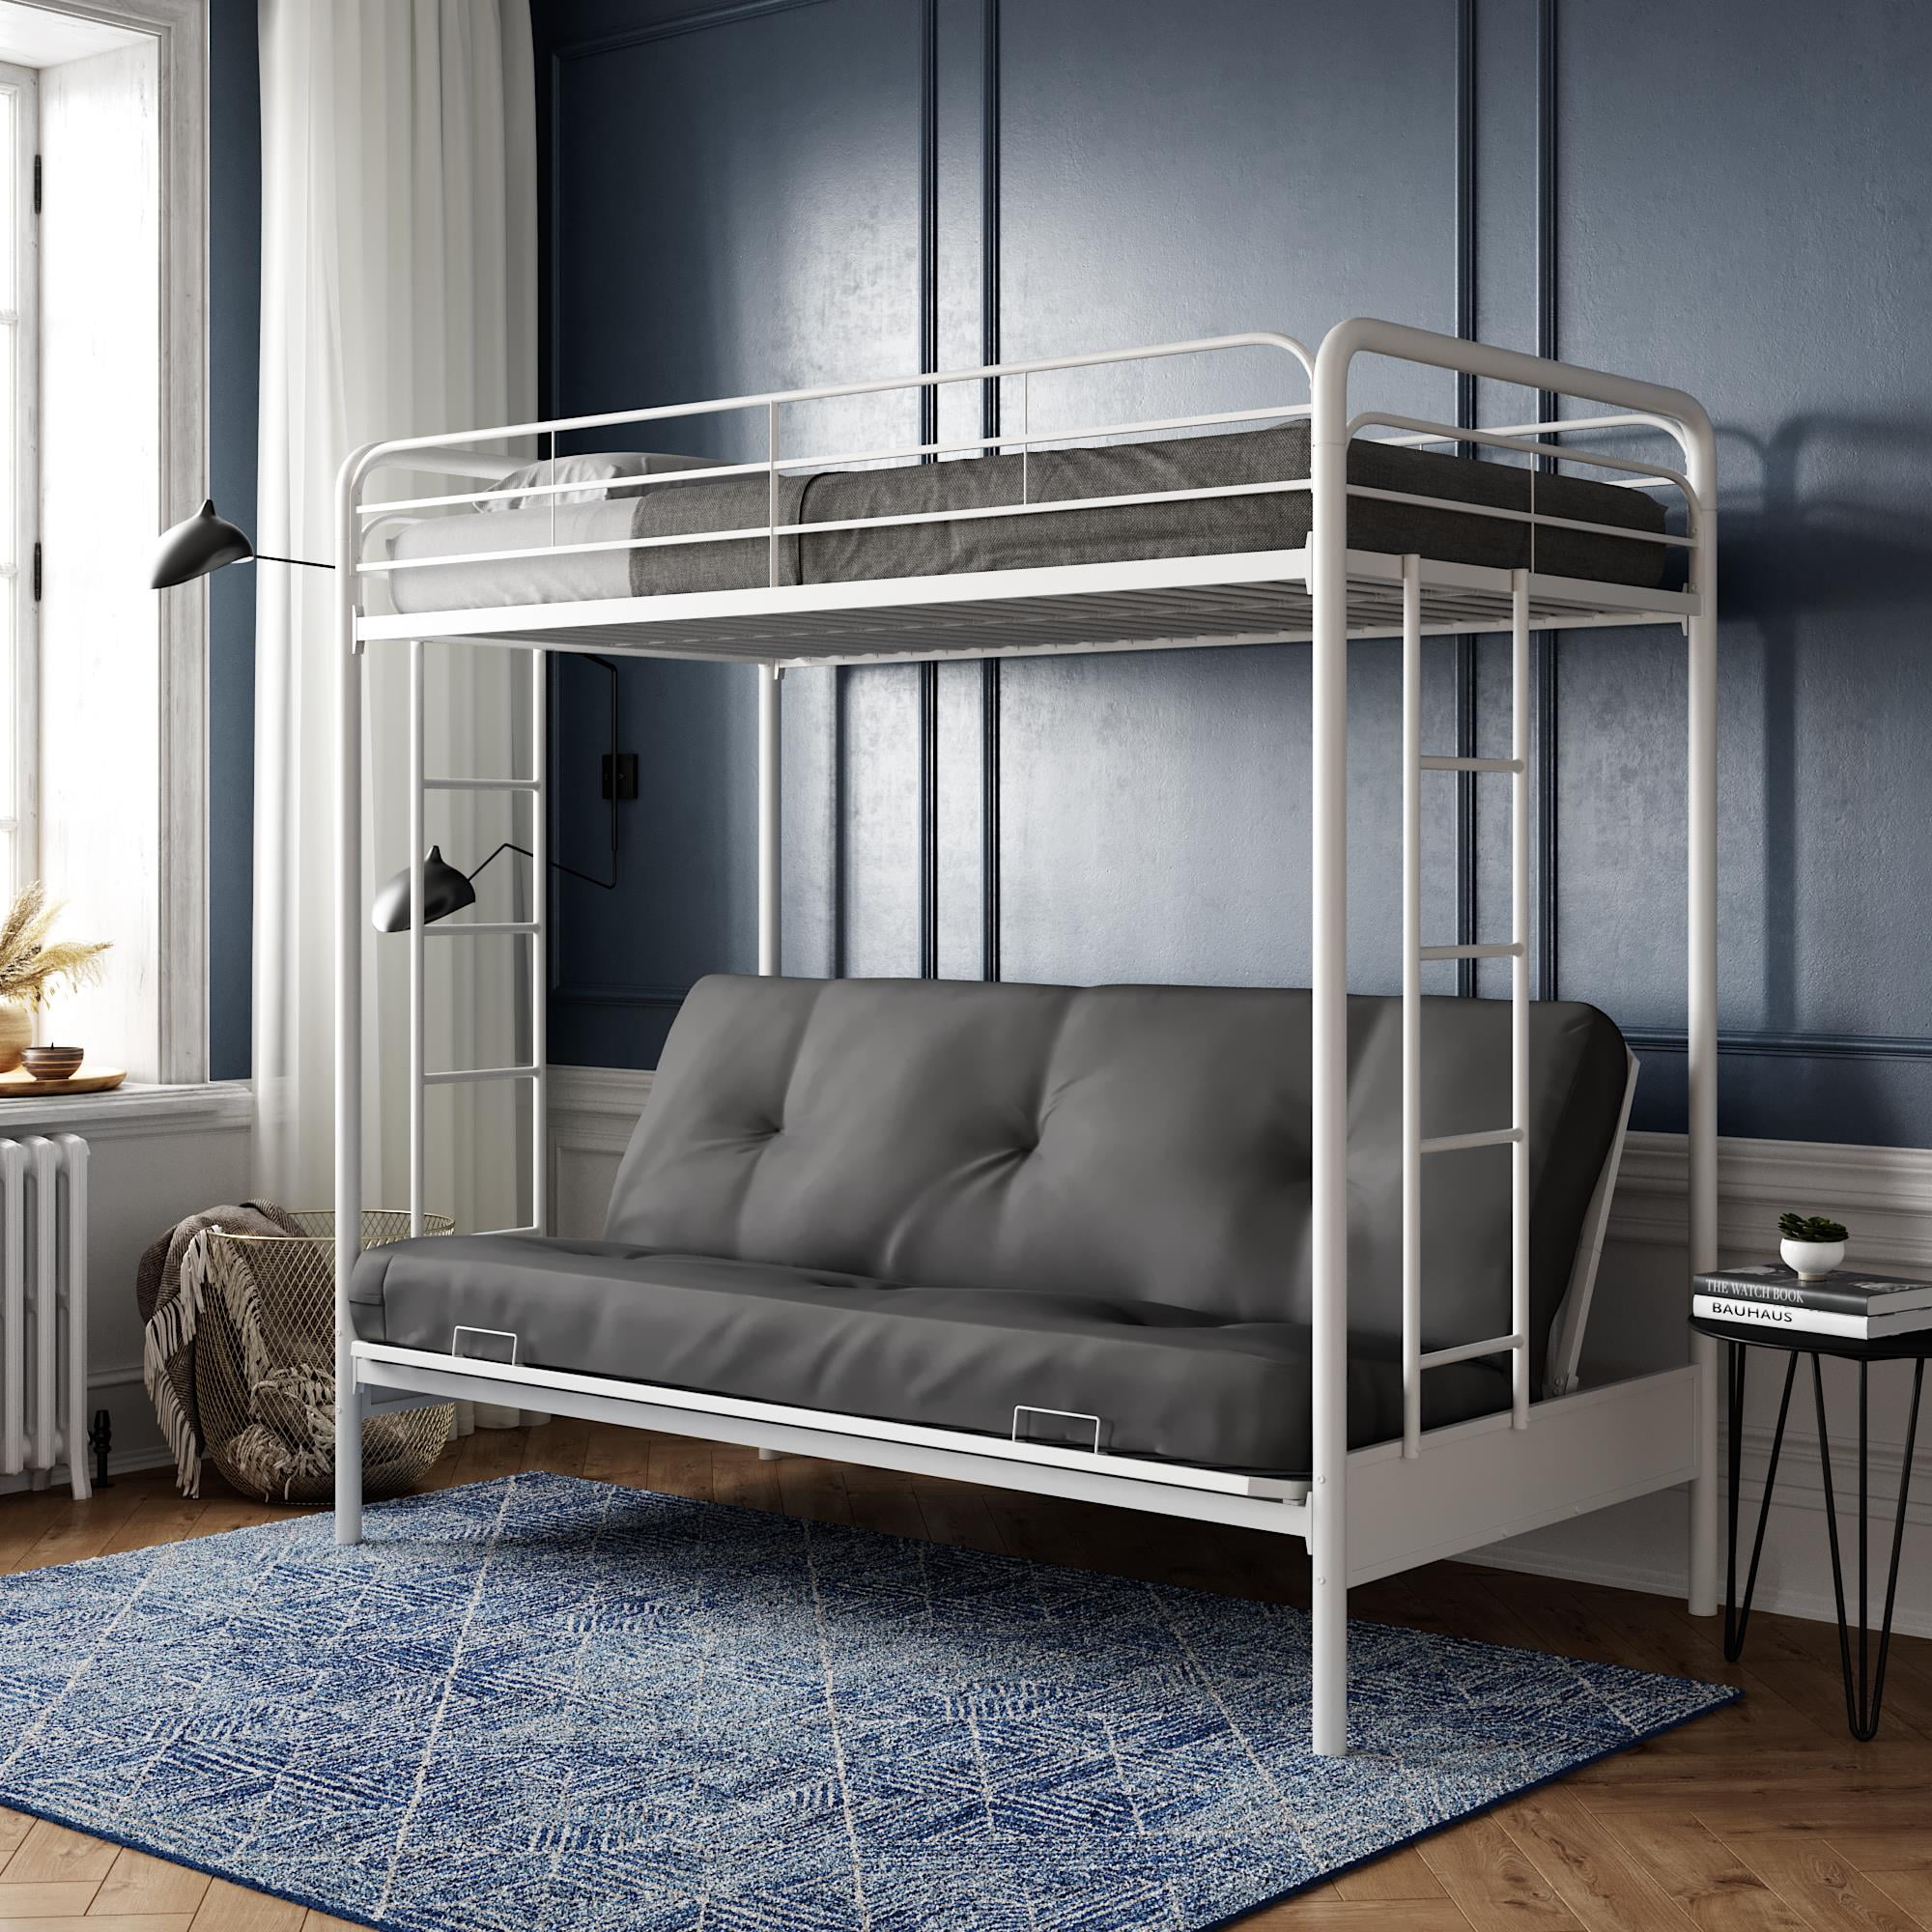 Dhp Twin Over Futon Metal Bunk Bed, Bed Futon Bunk